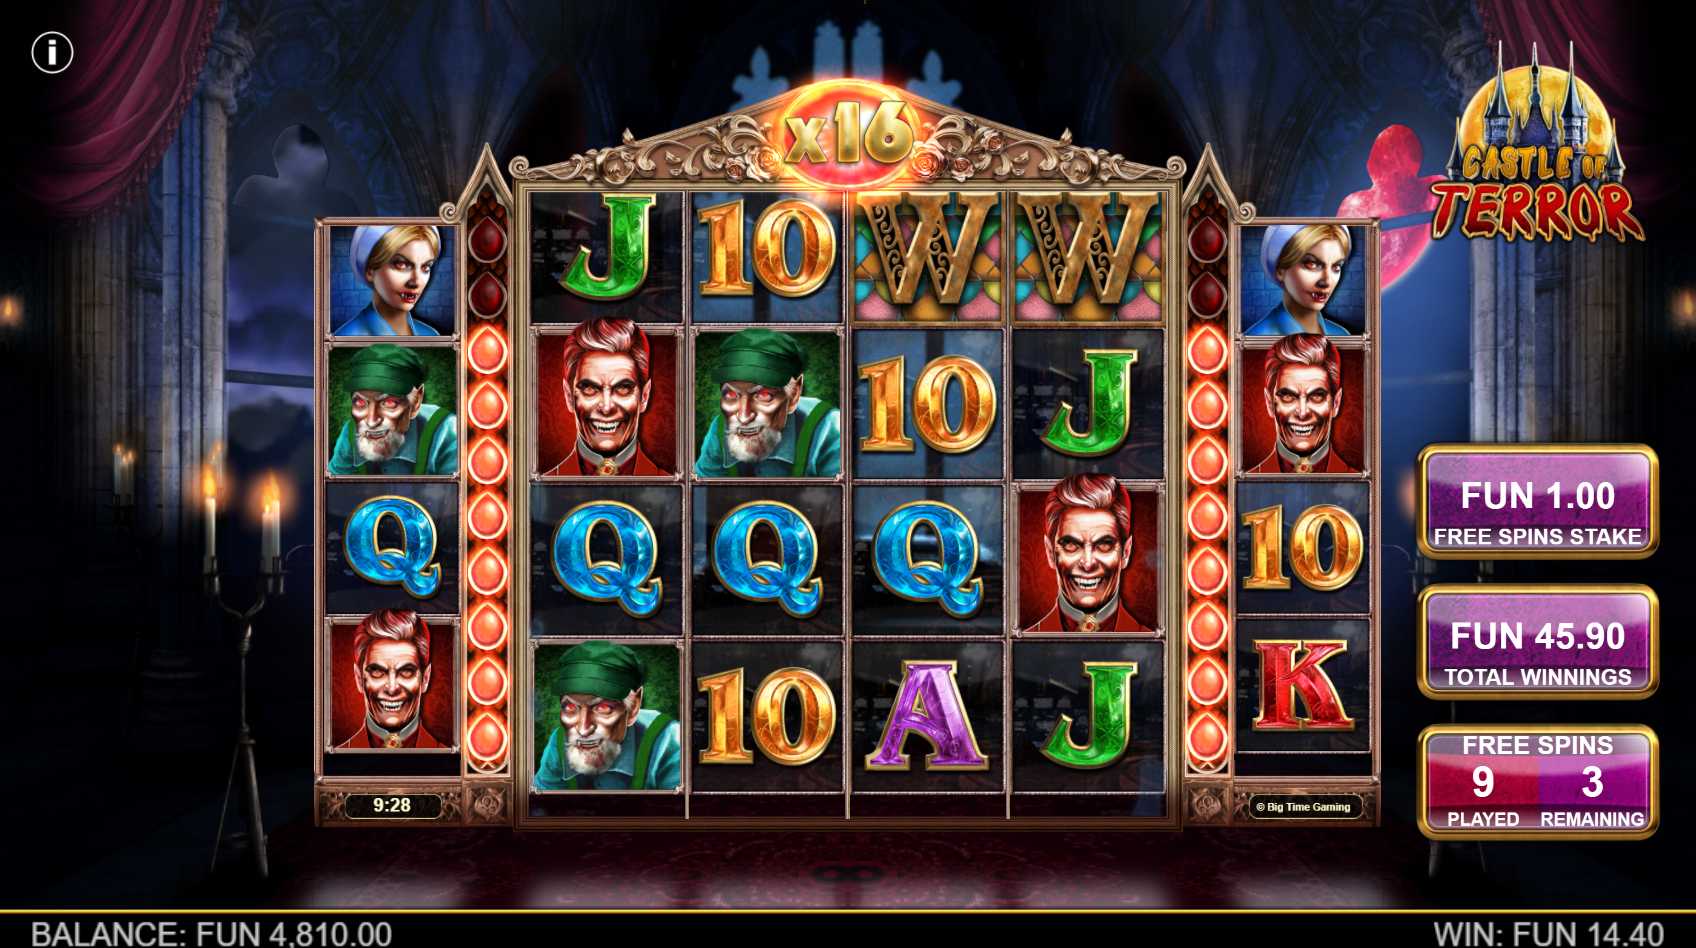 Castle of Terror Free Spins